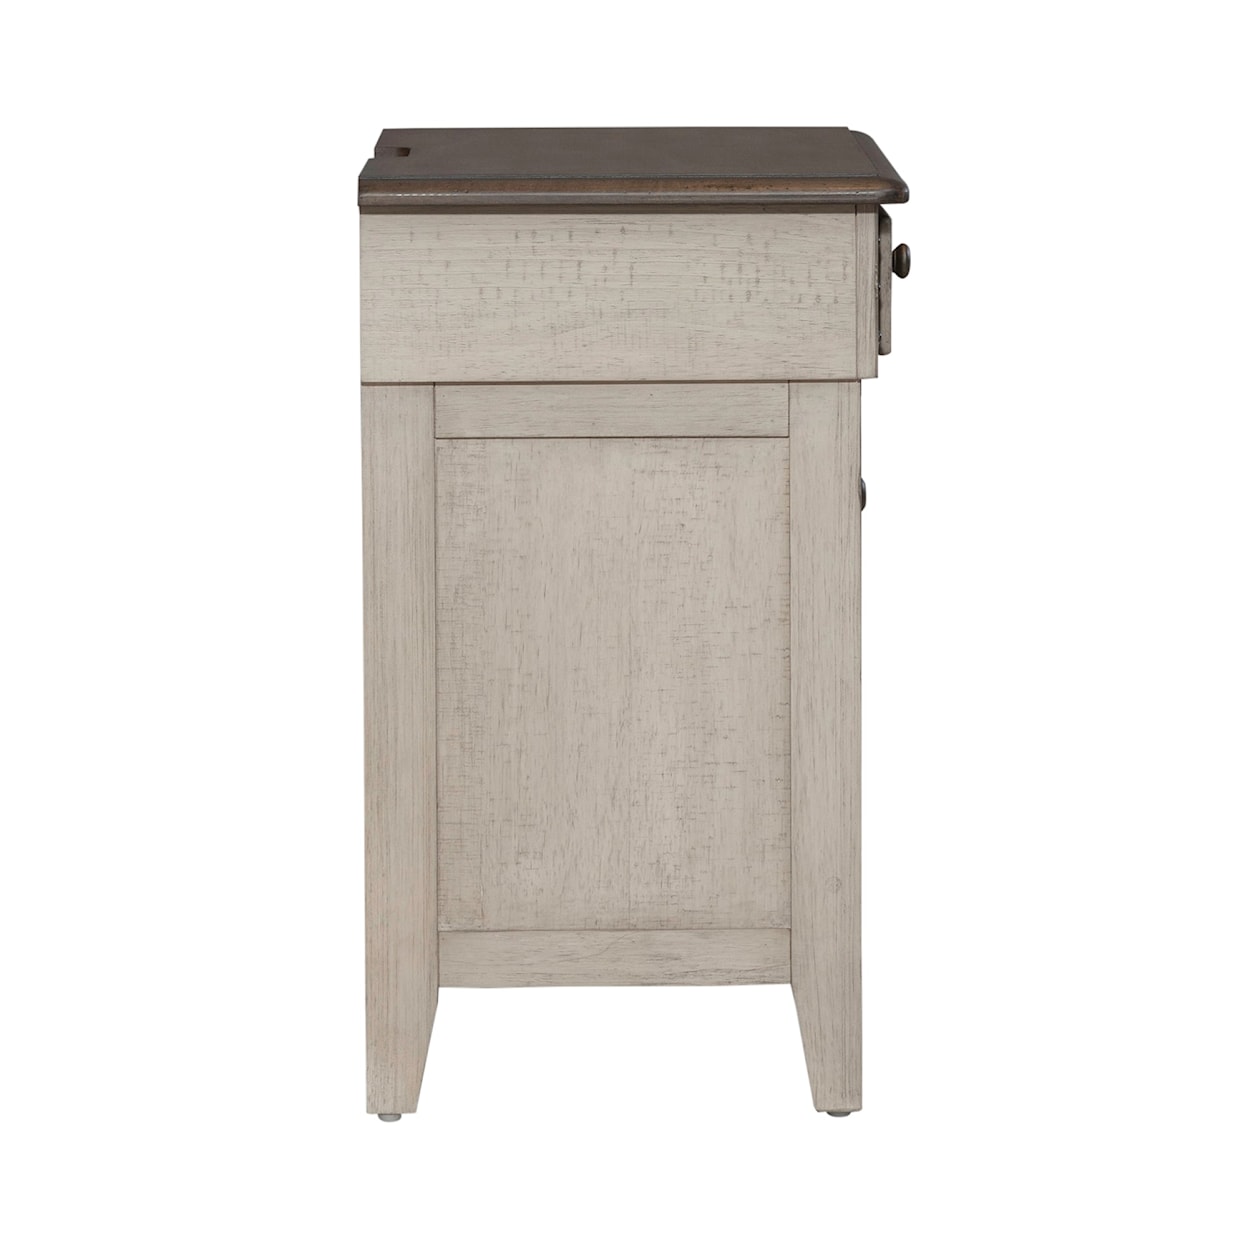 Liberty Furniture Ivy Hollow 3-Drawer Nightstand